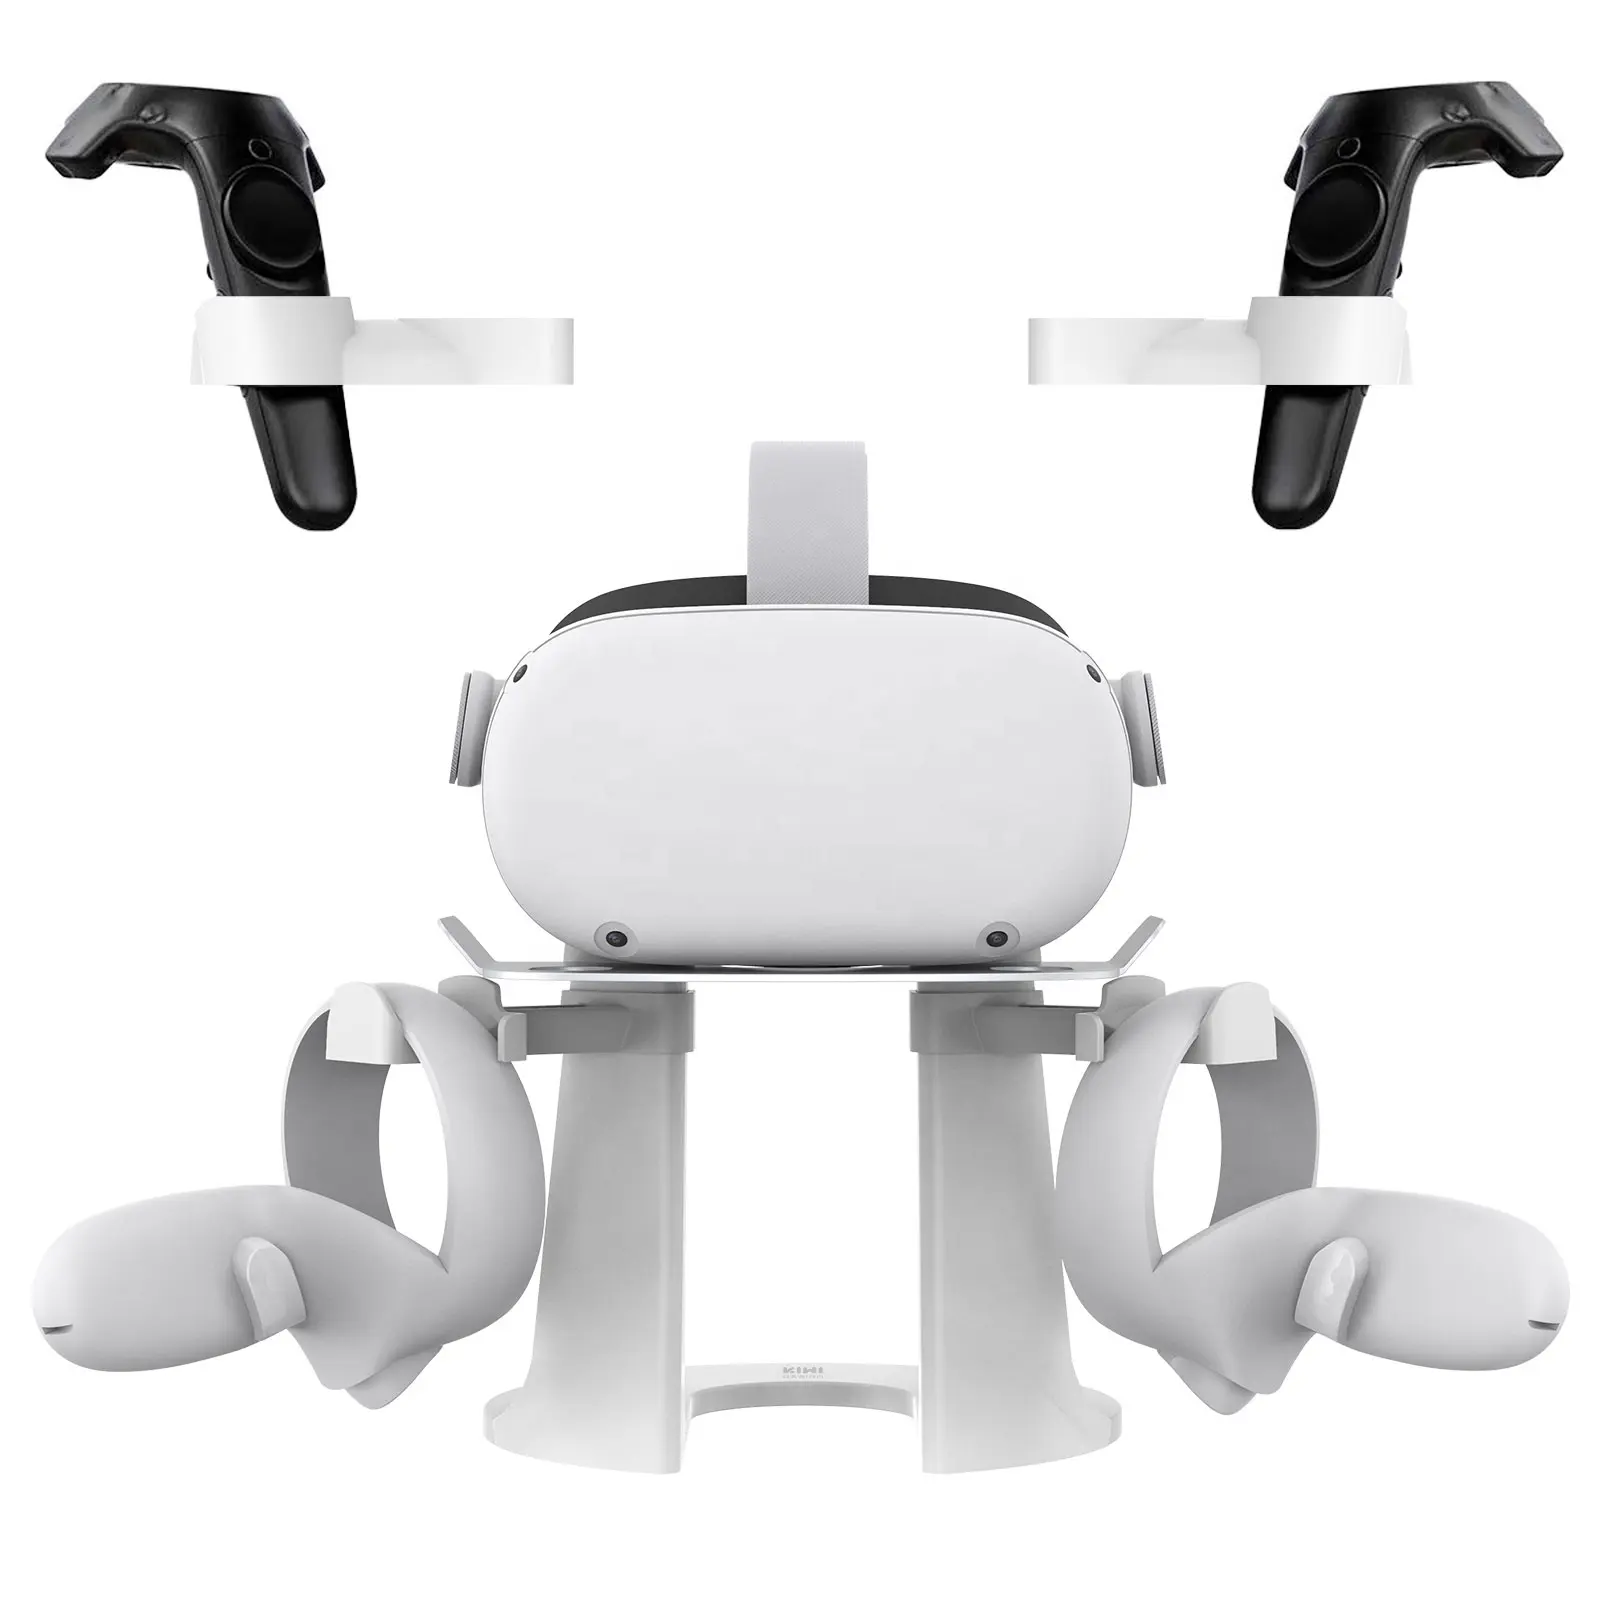 White VR Stand Controller Holder, VR Headset Display Stand and Controller Mount For Oculus Quest2/HTC VIVE/ VALVE INDEX